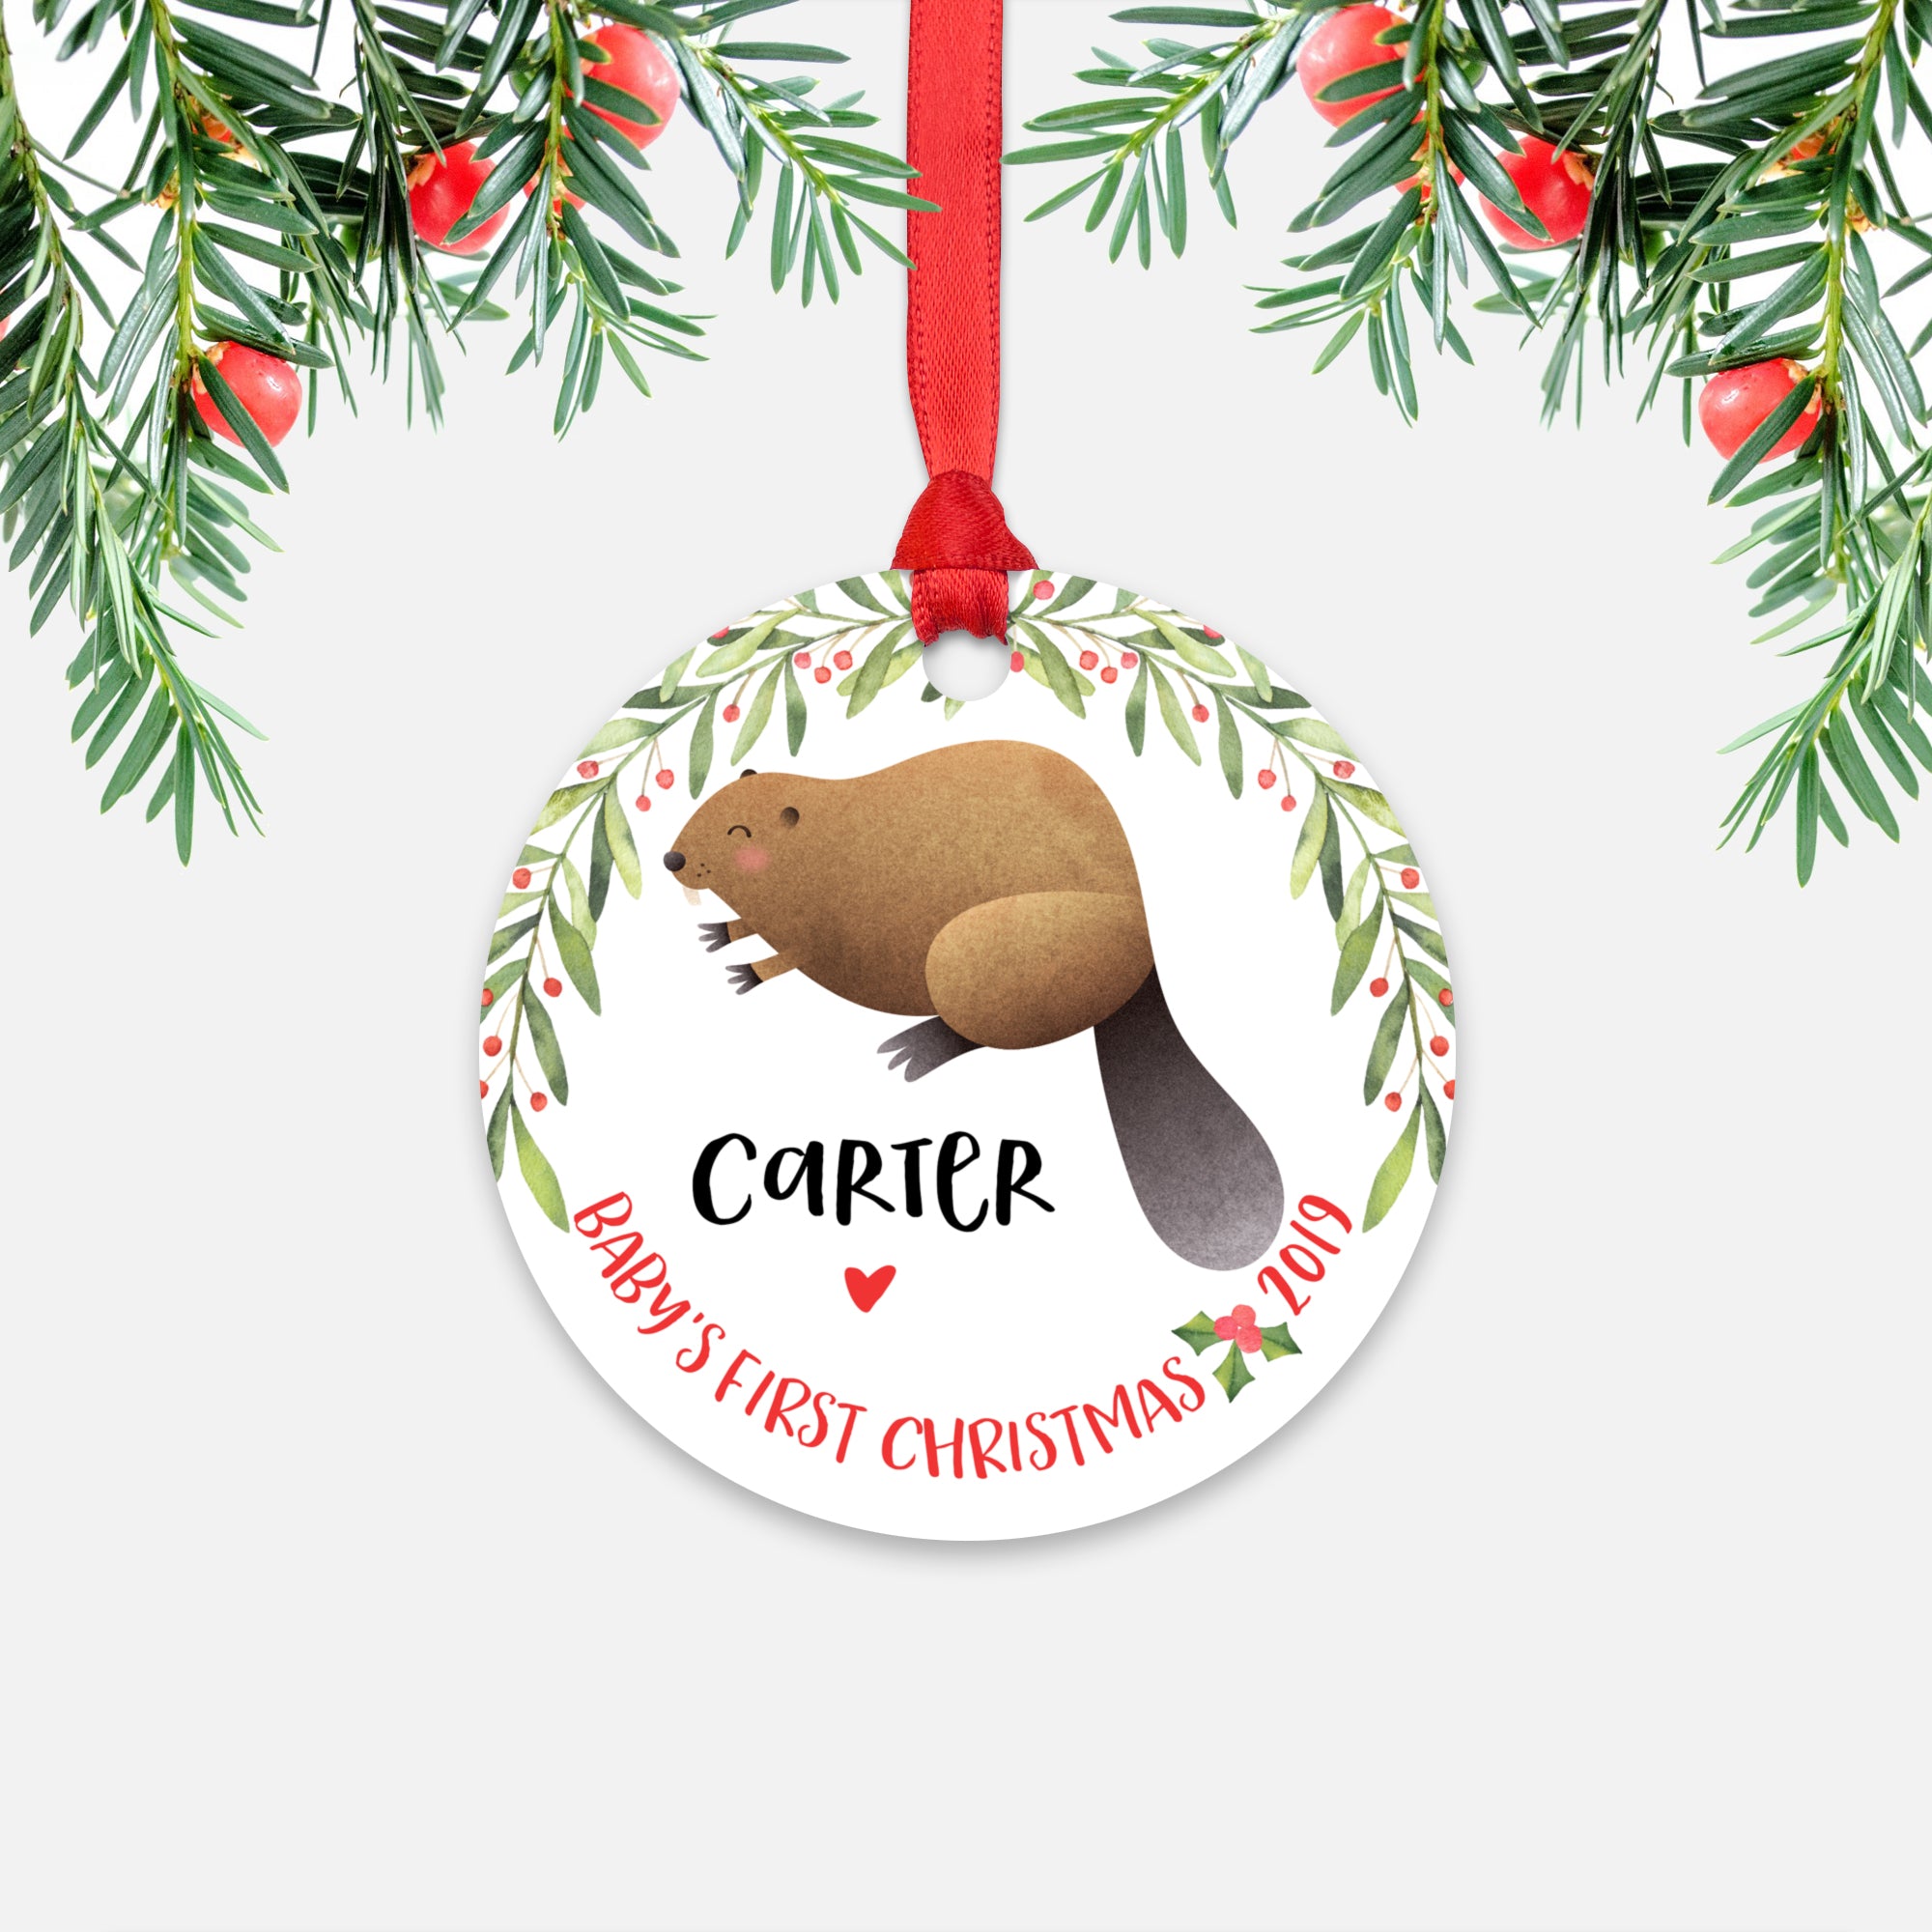 Beaver Personalized Baby’s First Christmas Ornament for Baby Boy or Baby Girl - Cute Woodland Animal Baby 1st Holidays Decoration - Custom Christmas Gift Idea for New Parents - Round Aluminum - by Happy Cat Prints